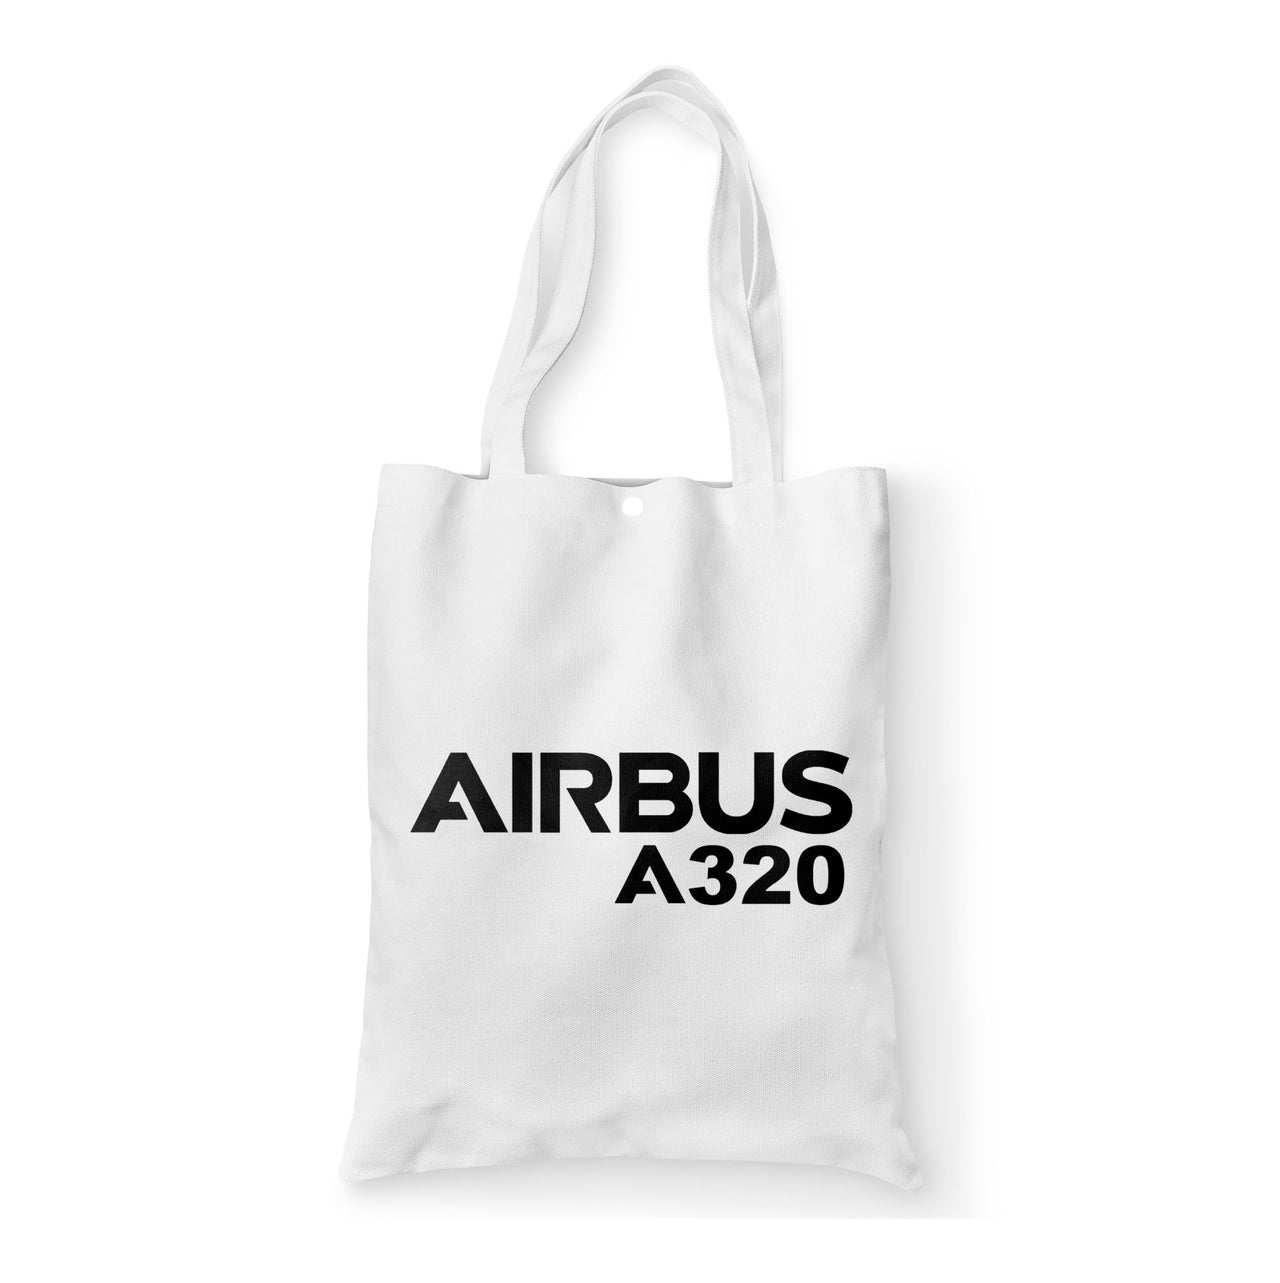 Airbus A320 & Text Designed Tote Bags